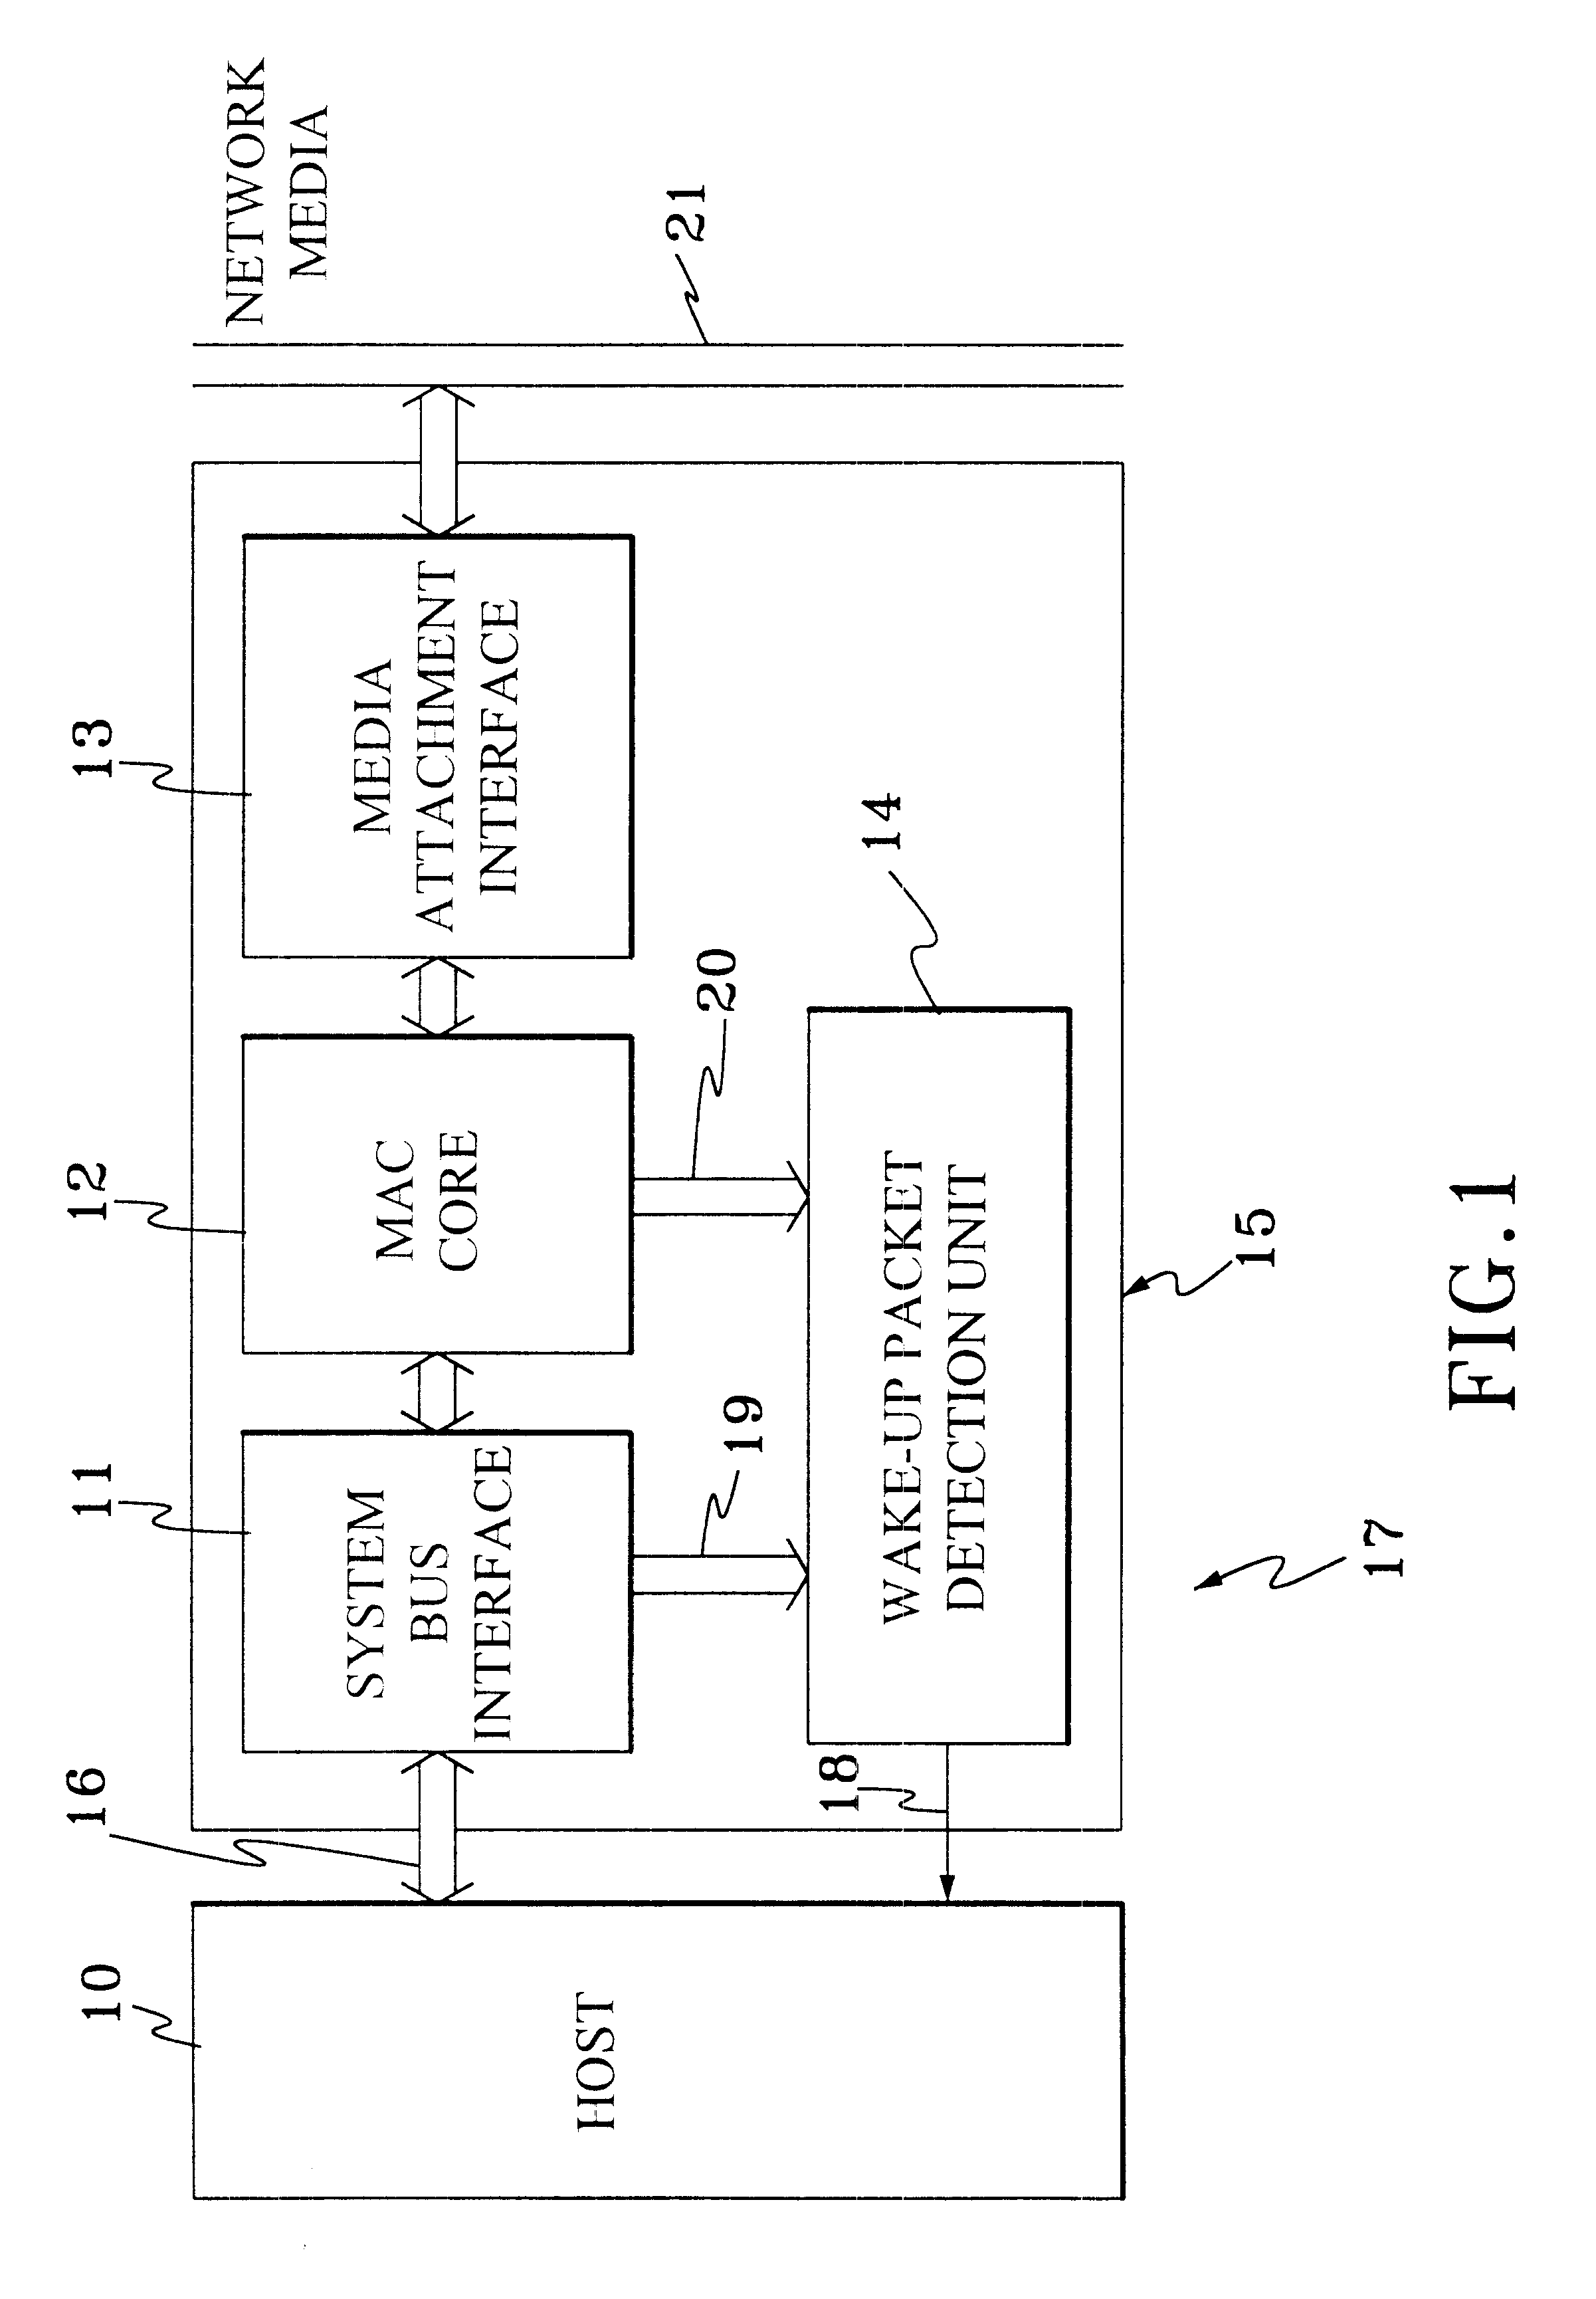 Method and apparatus for detecting data streams with specific pattern